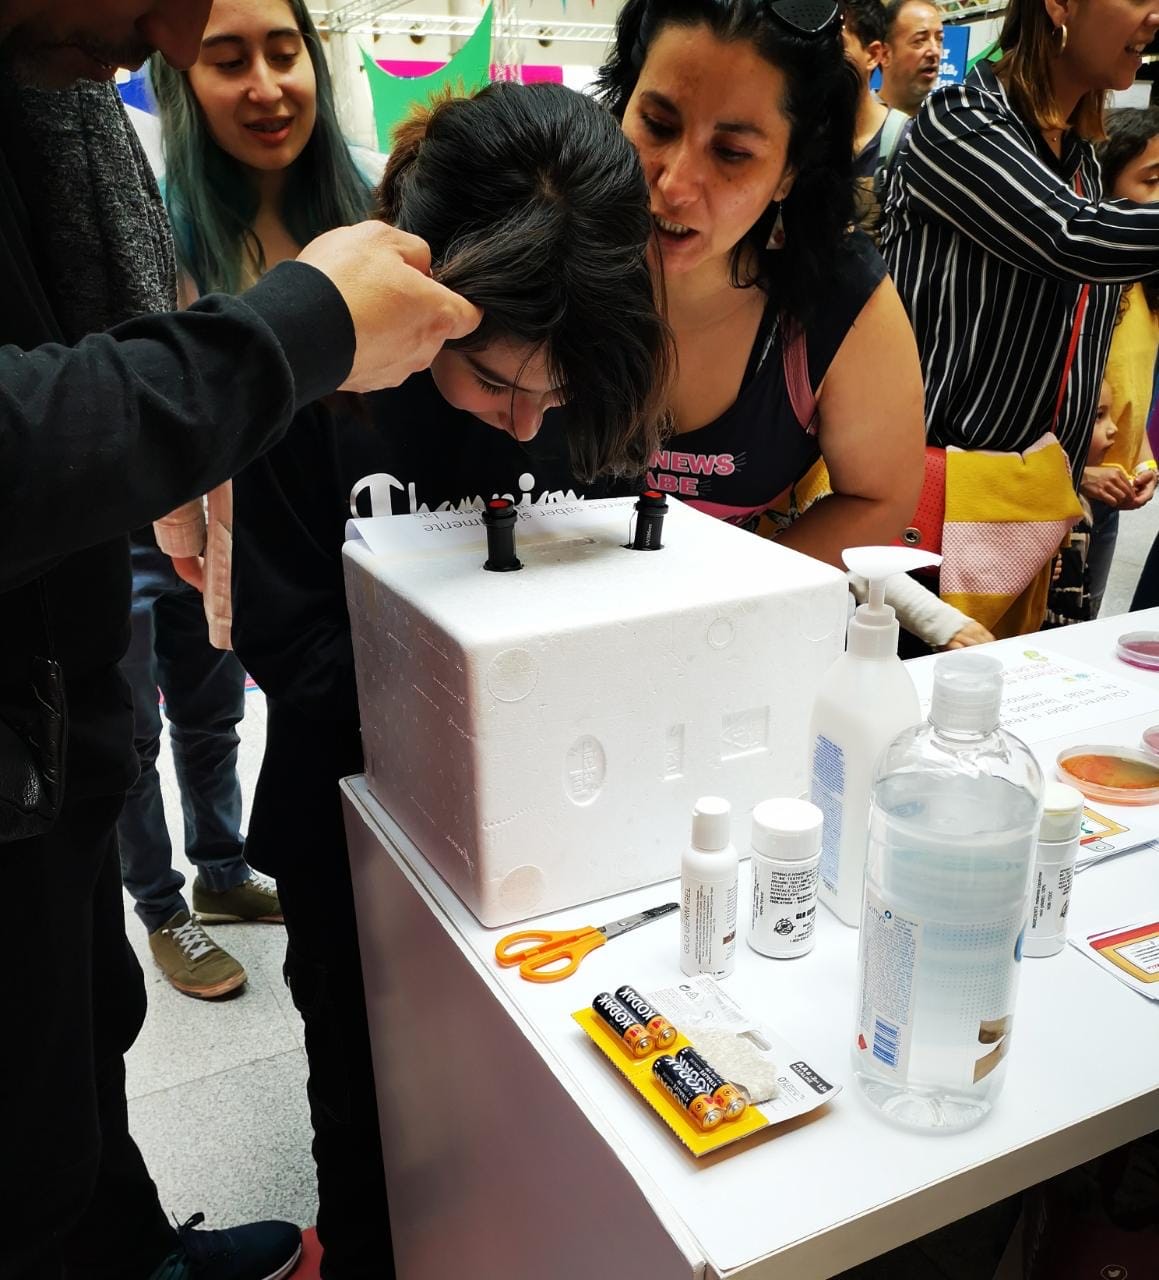 A young woman gazes into a microscope at the festival